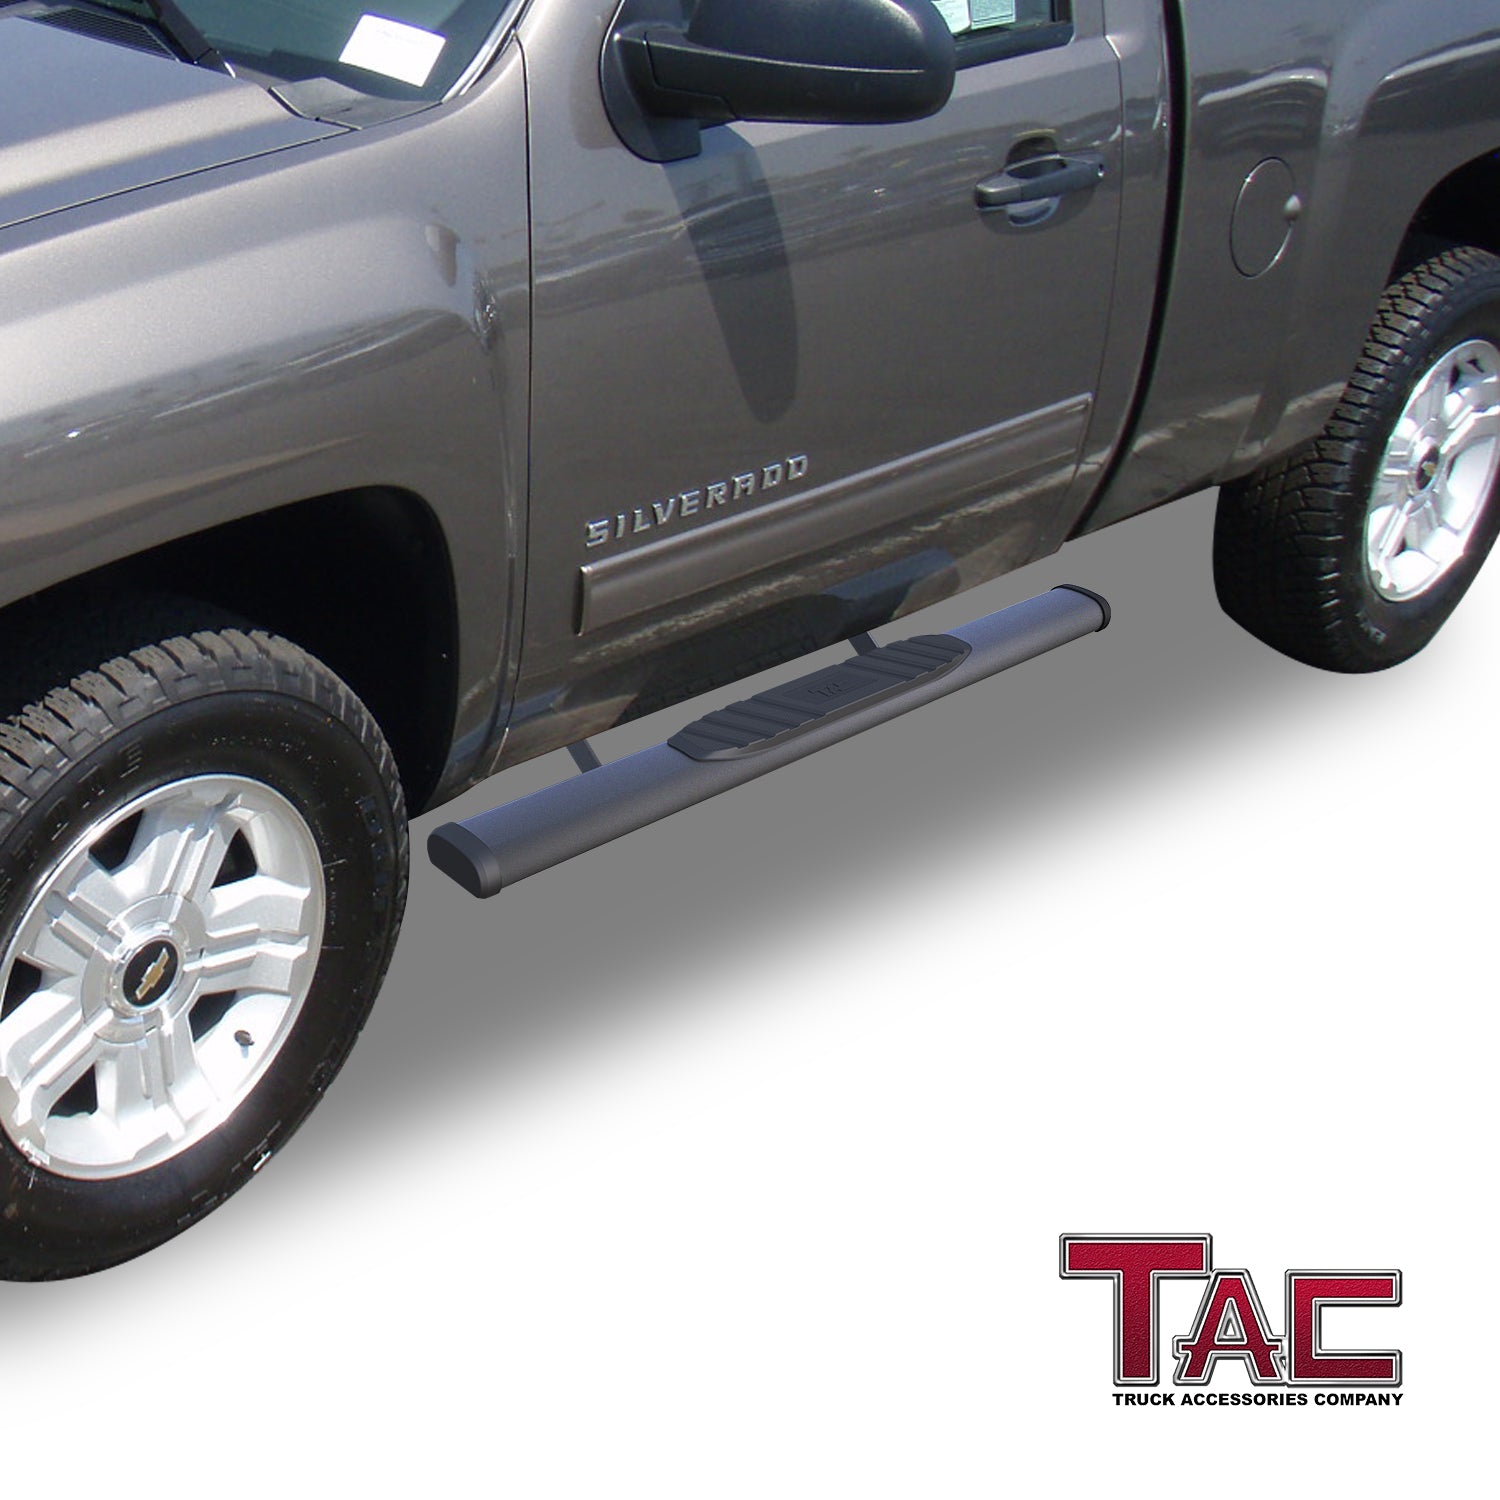 TAC Arrow Side Steps Running Boards Compatible with 2007-2018 Chevy Silverado/GMC Sierra 1500 | 2007-2019 2500/3500 Heavy Duty Regular Cab Truck Pickup 5” Aluminum Texture Black Step Rails Nerf Bars - 0